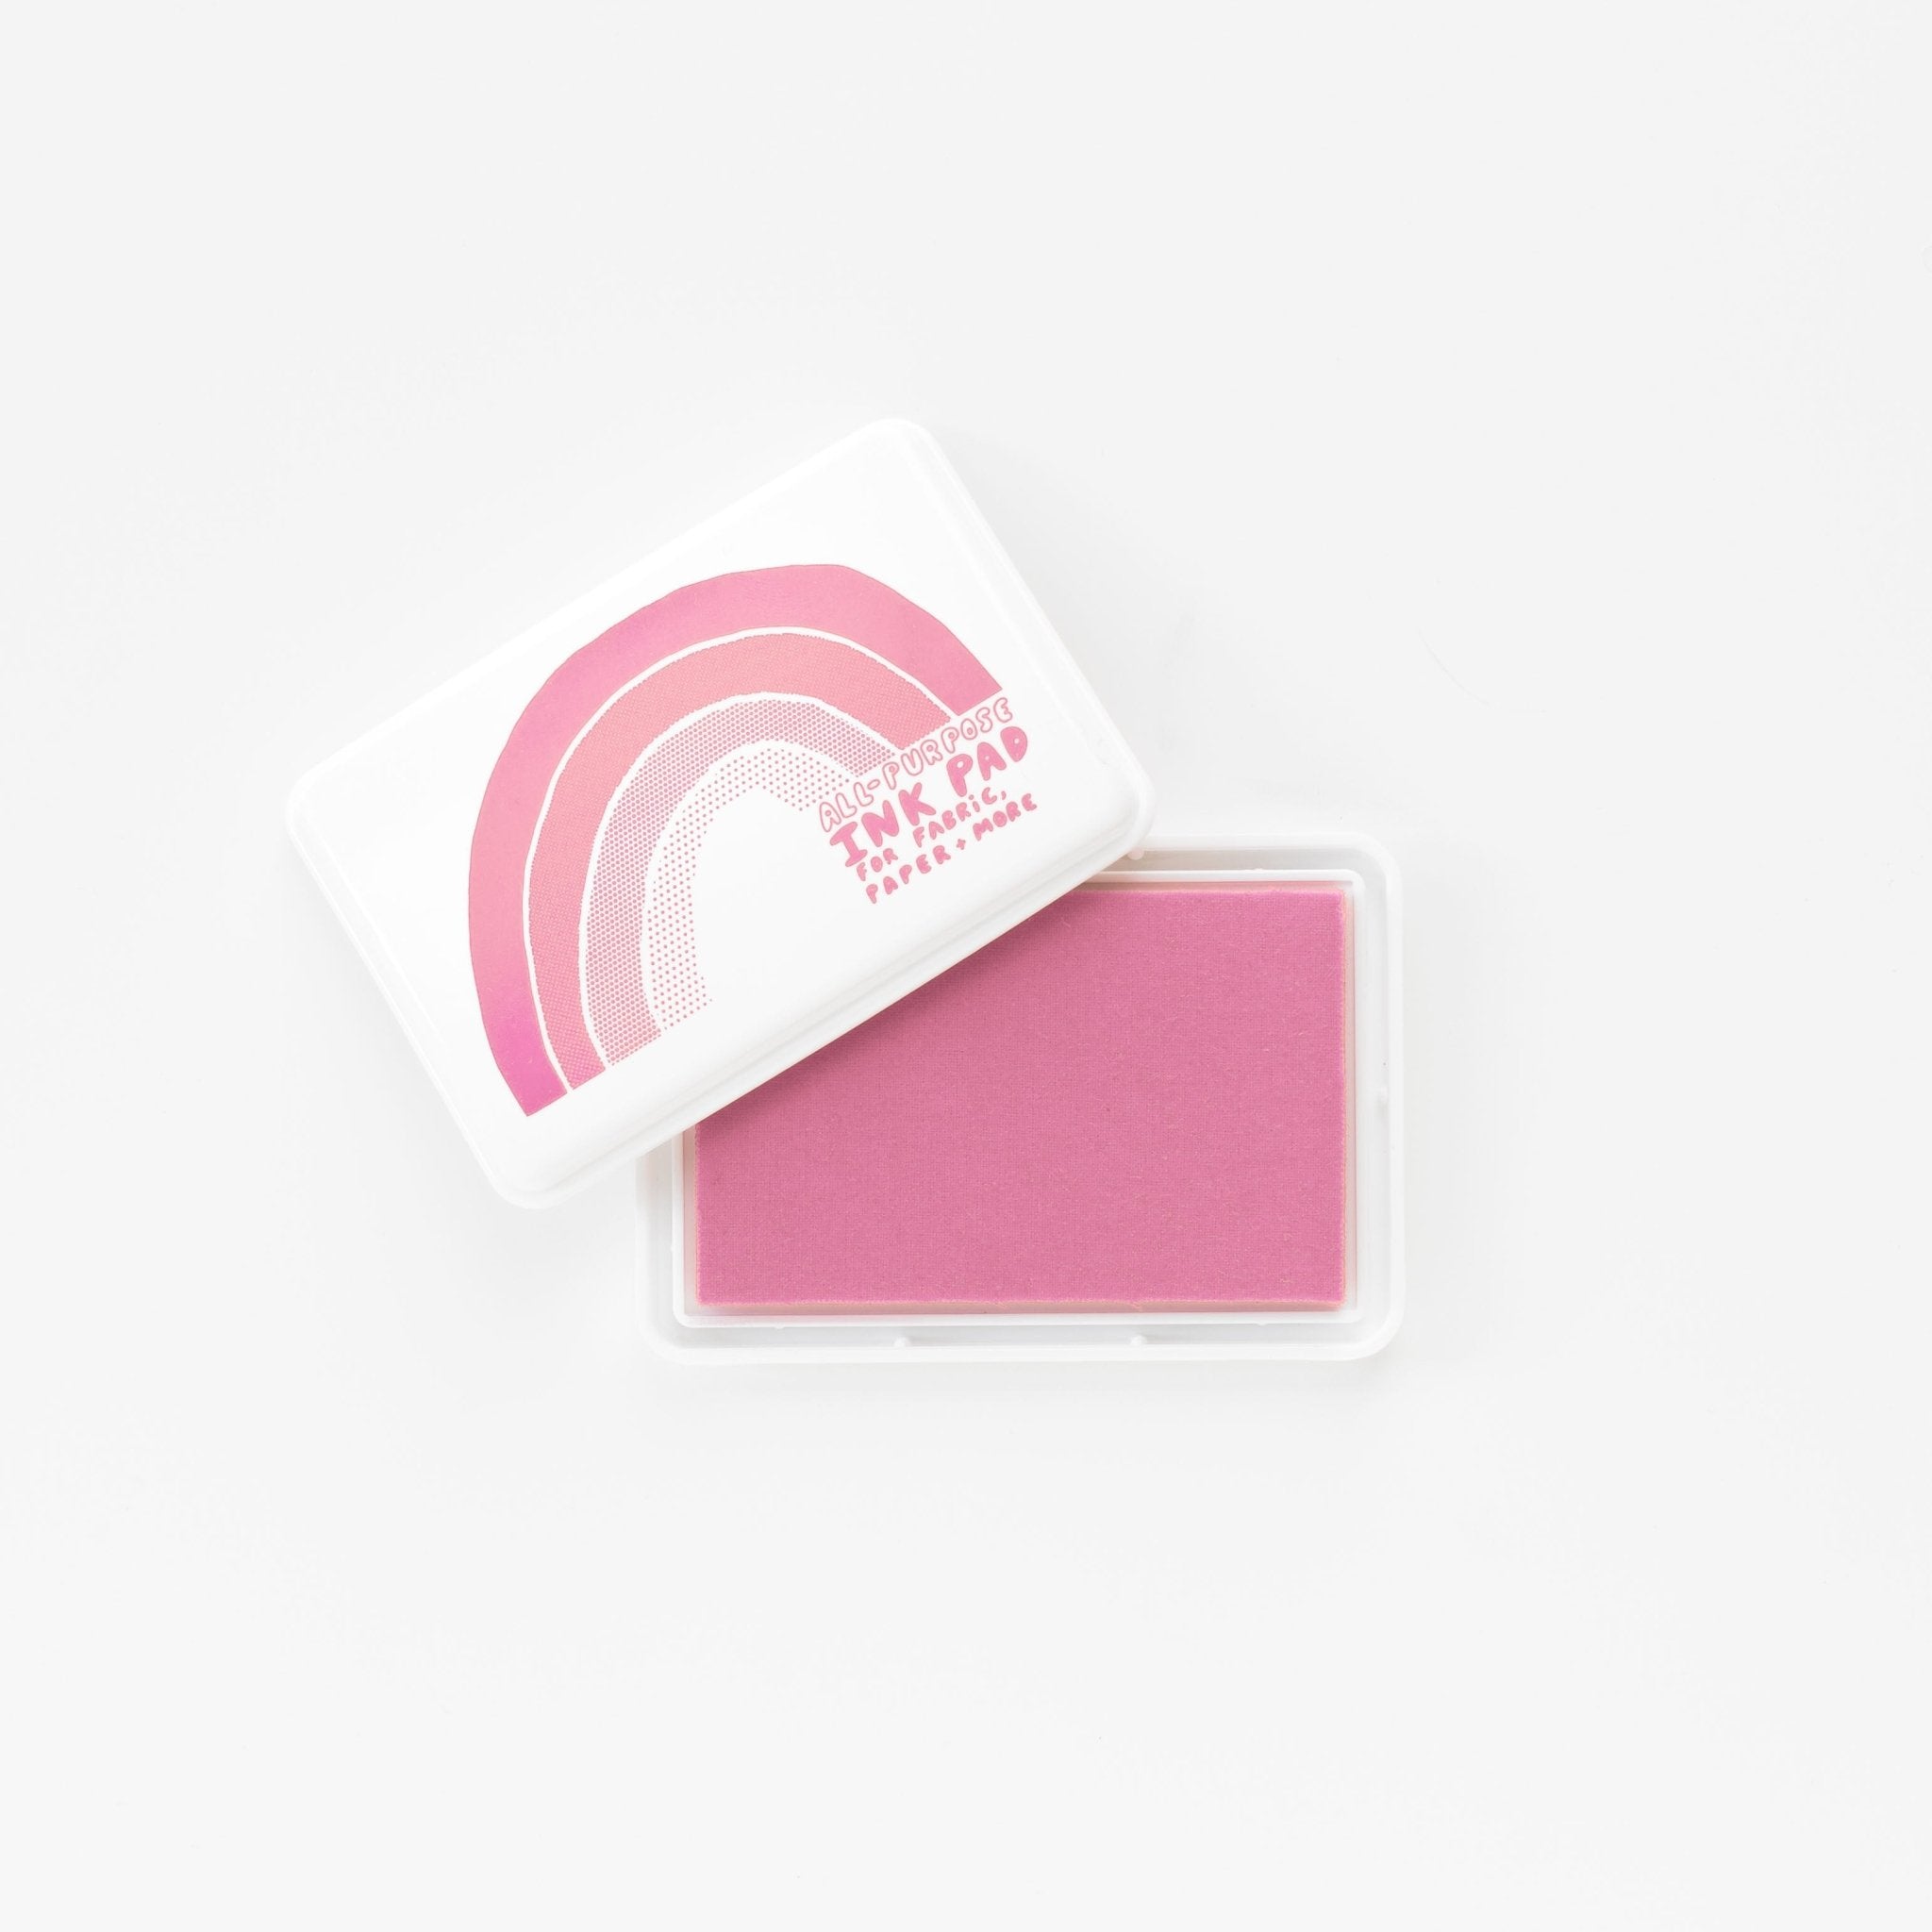 Pink Fabric Ink Stamp Pad, Fabric Ink Pad for Rubber Stamps